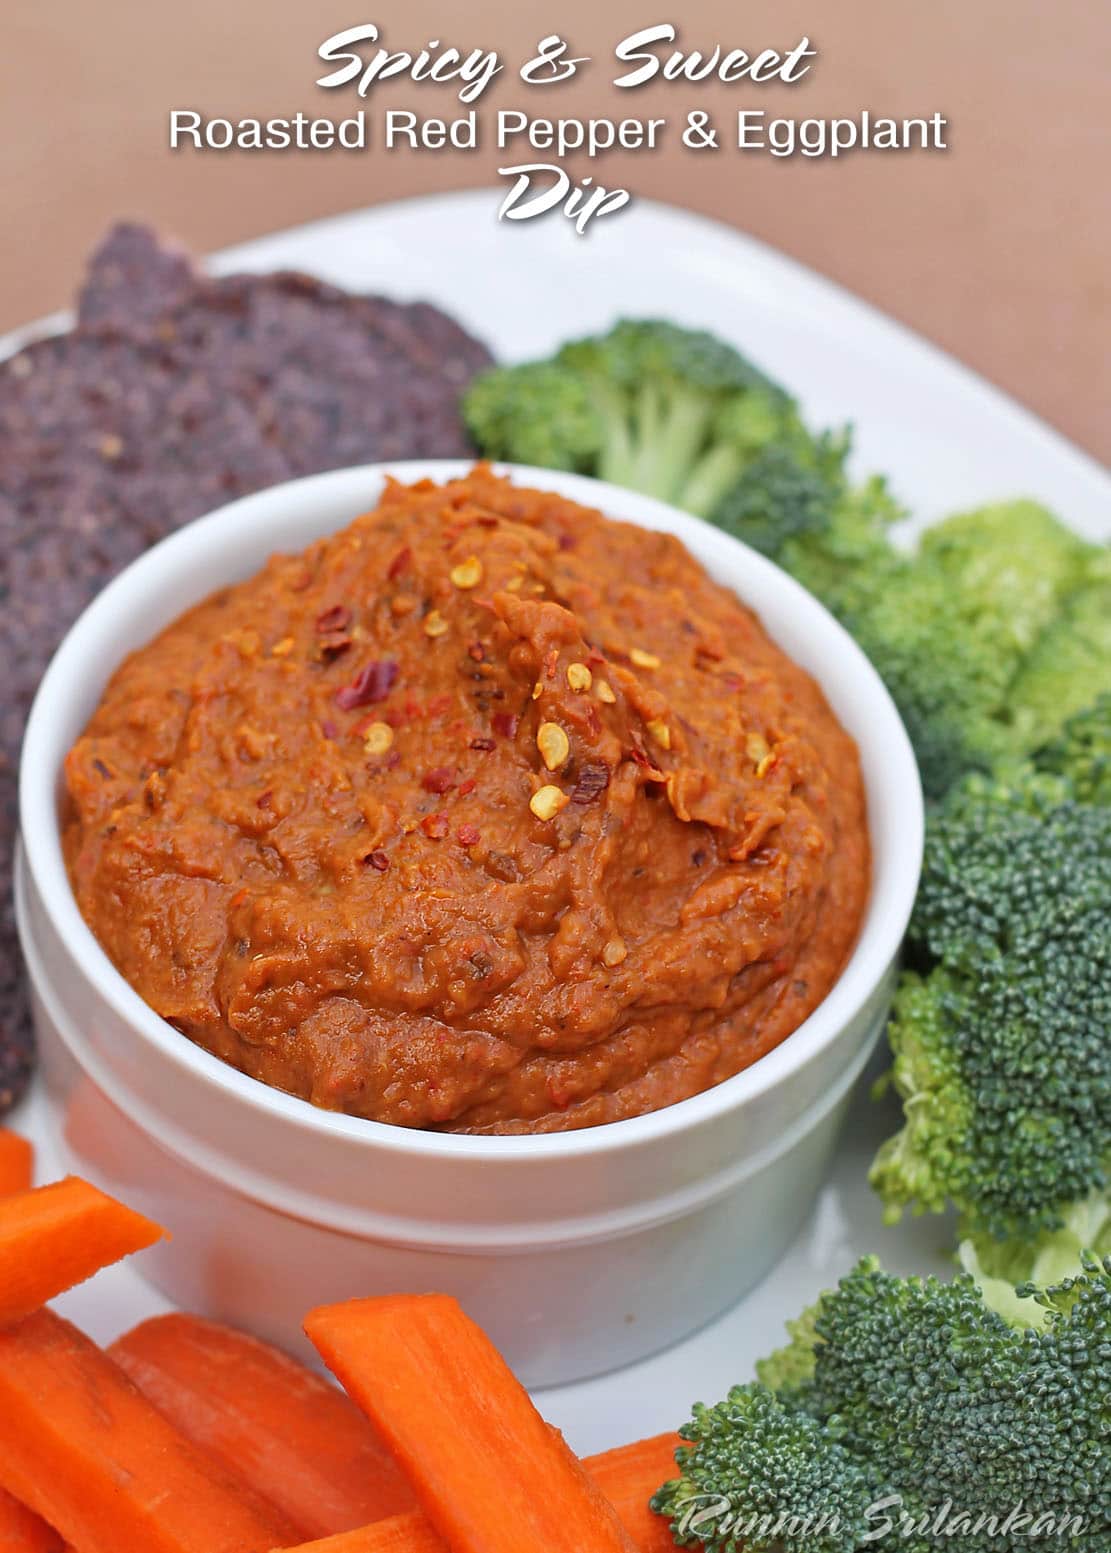 Roasted Eggplant And Red Pepper Dip {recipe}